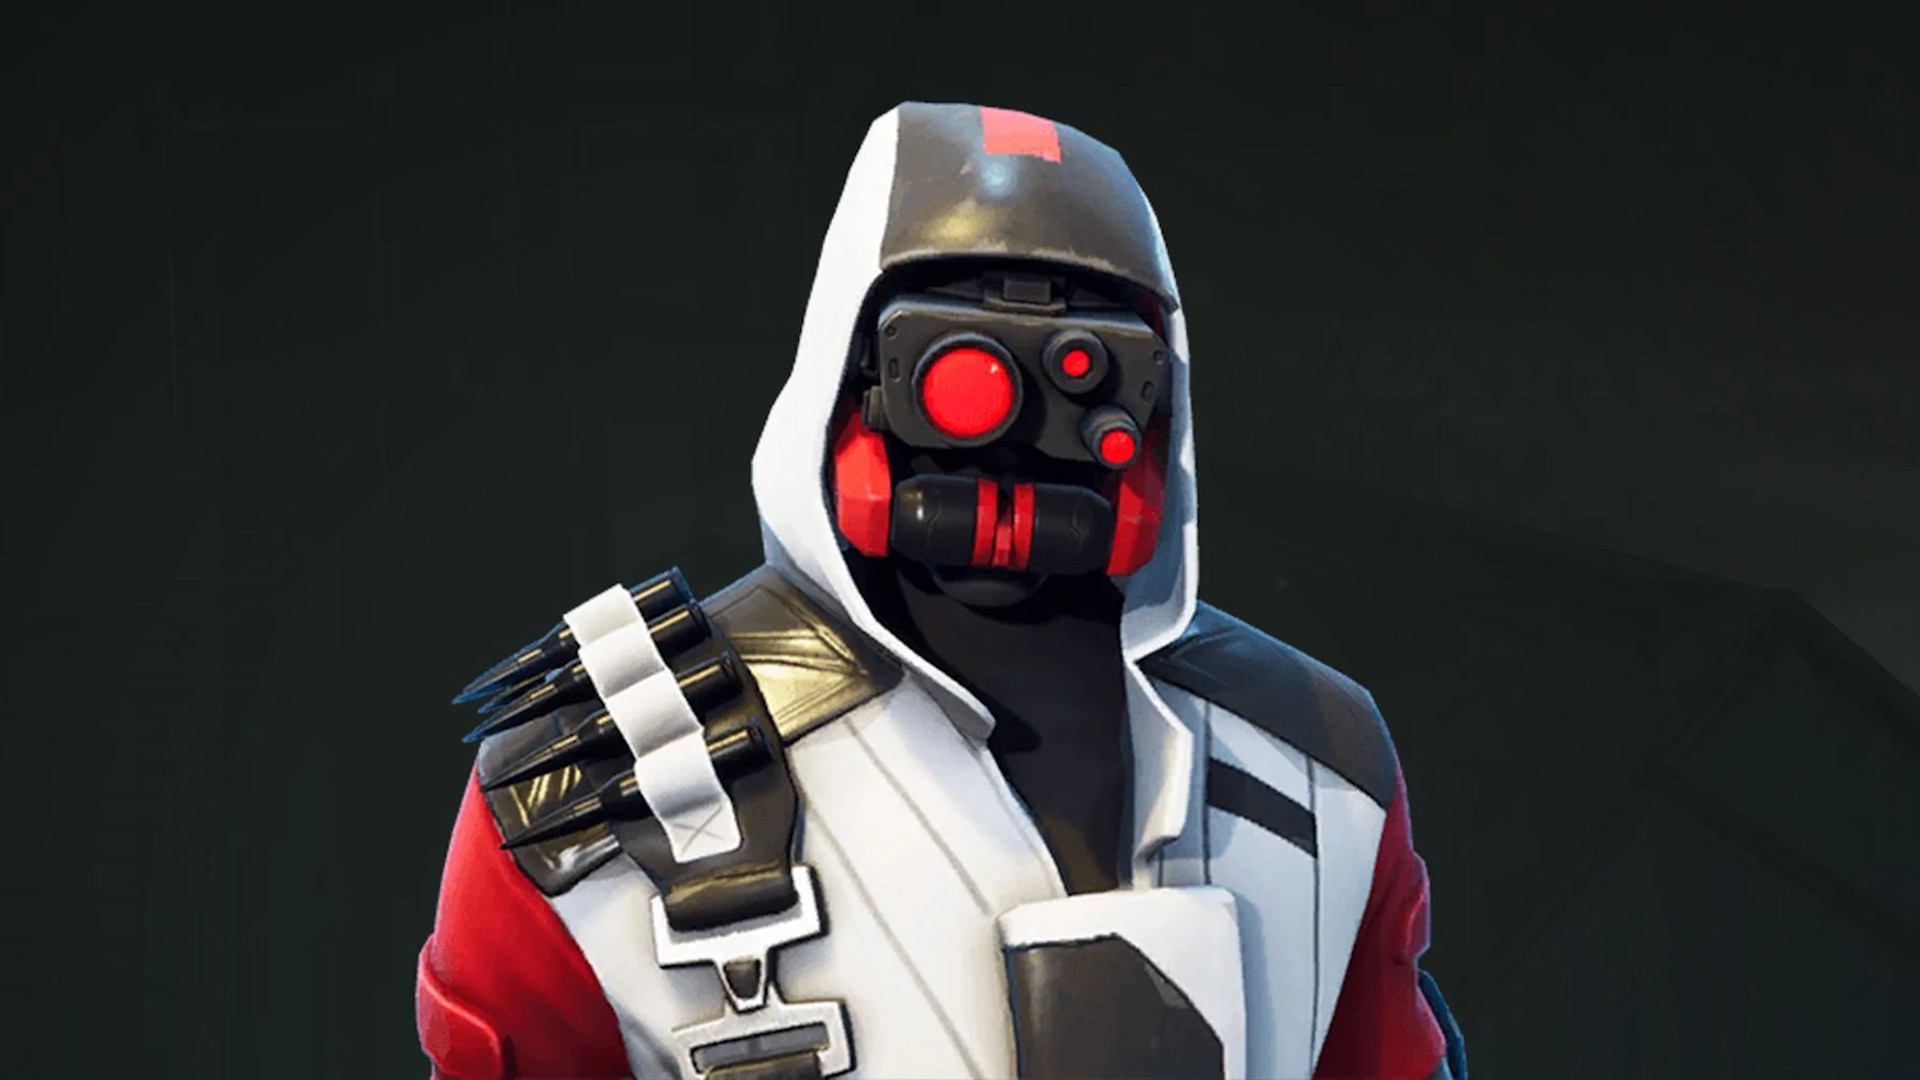 Rarest Fortnite skins: The Double Helix character looking towards the camera.